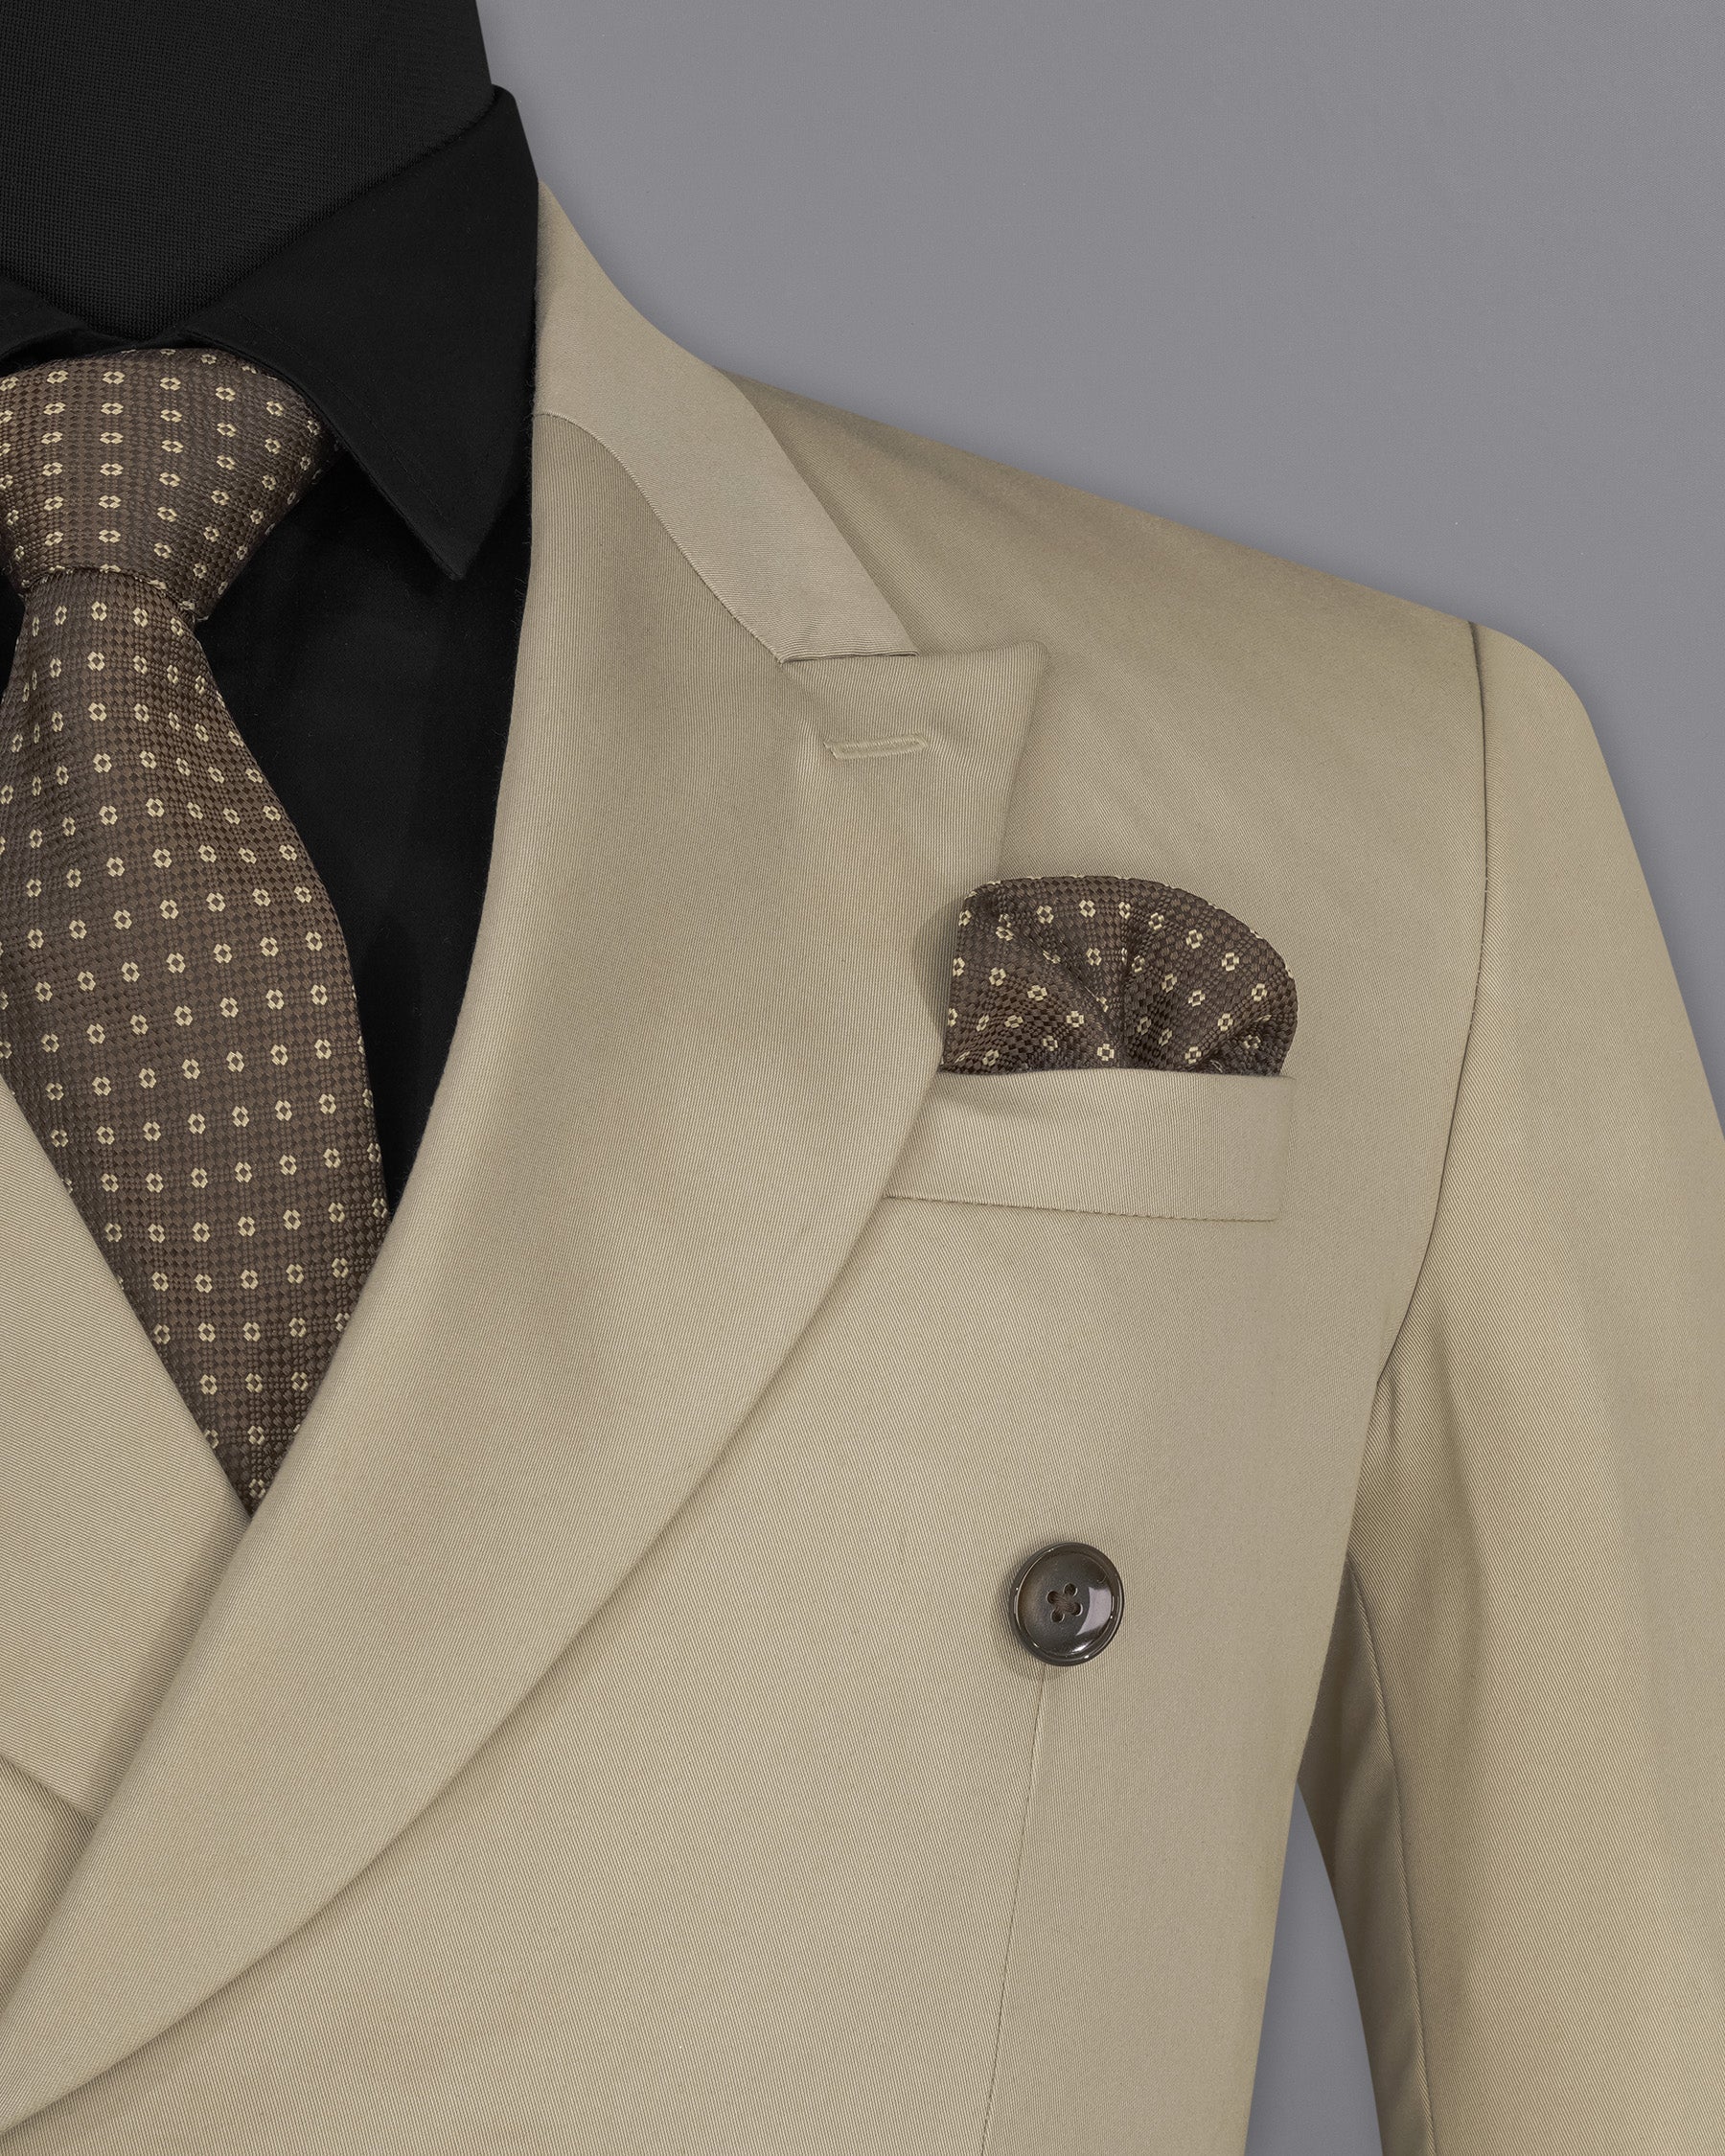 Hillary Light Brown Double Breasted Suit